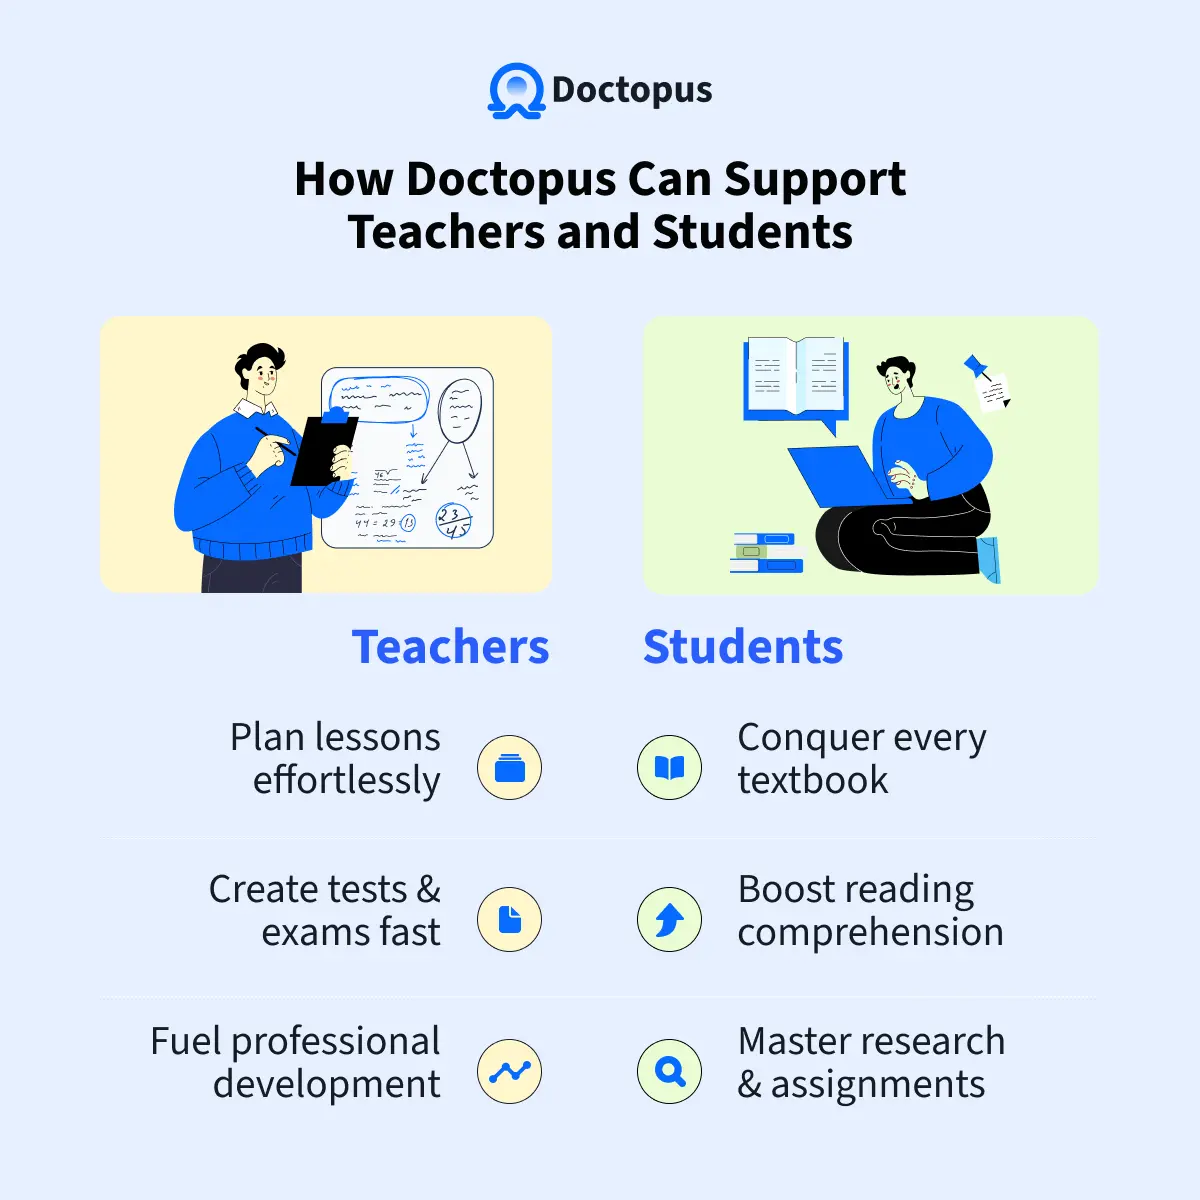 How Doctopus supports teachers and students